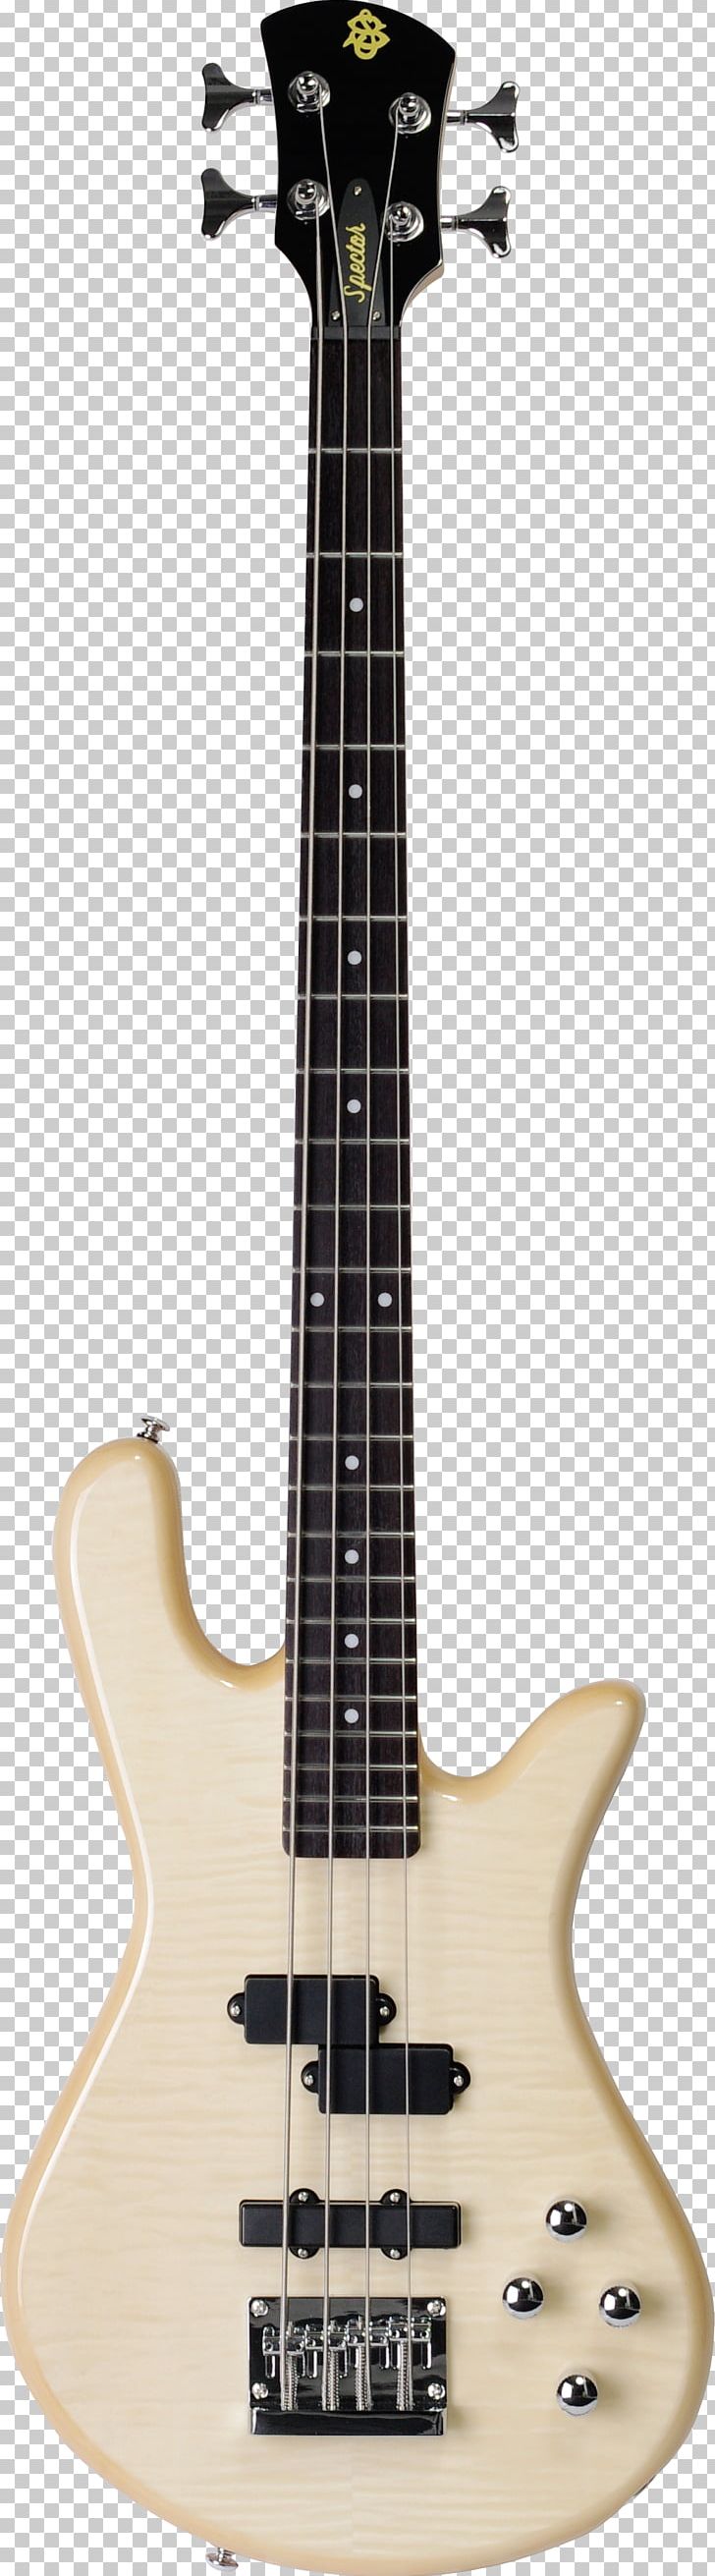 Acoustic Bass Guitar Acoustic-electric Guitar PNG, Clipart, Acoustic Electric Guitar, Gretsch, Guitar Accessory, Musical Instrument, Musical Instruments Free PNG Download